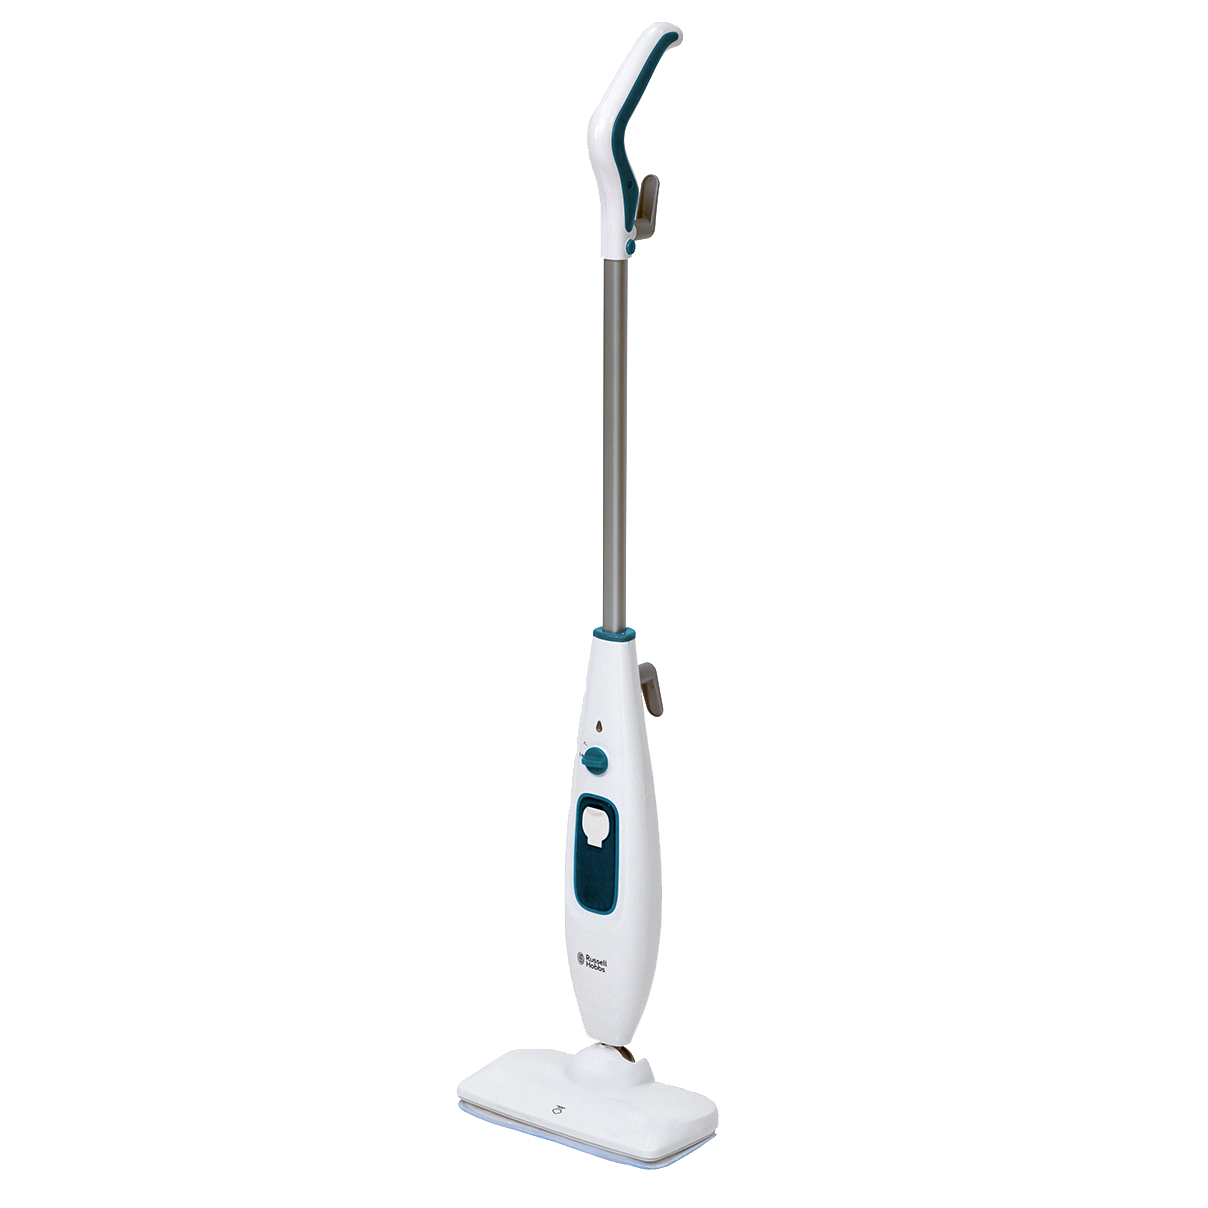 Mop Floor Cleaner PNG High Quality Image